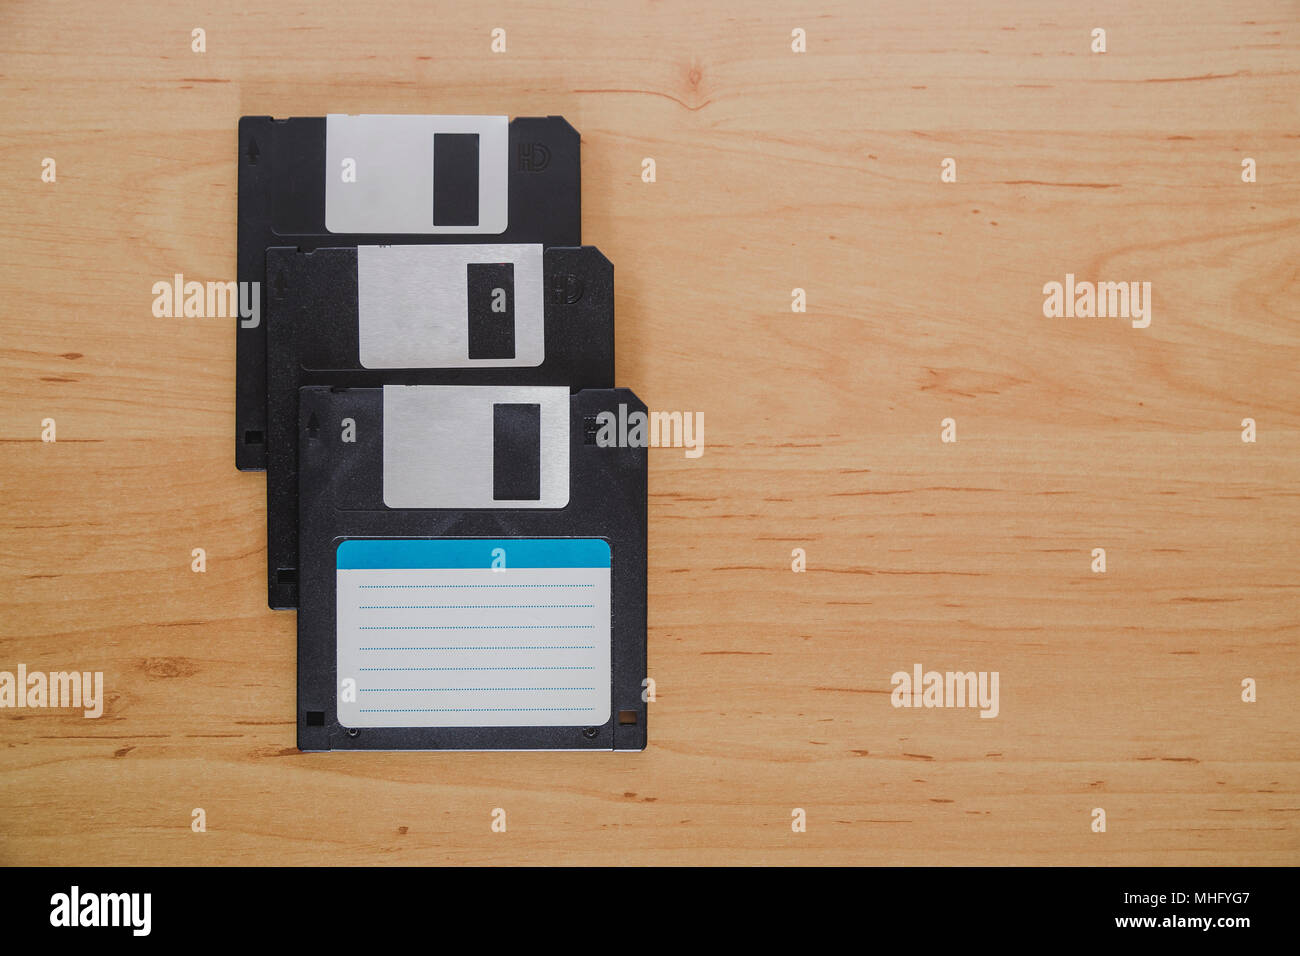 Three floppy disks on a wooden background Stock Photo